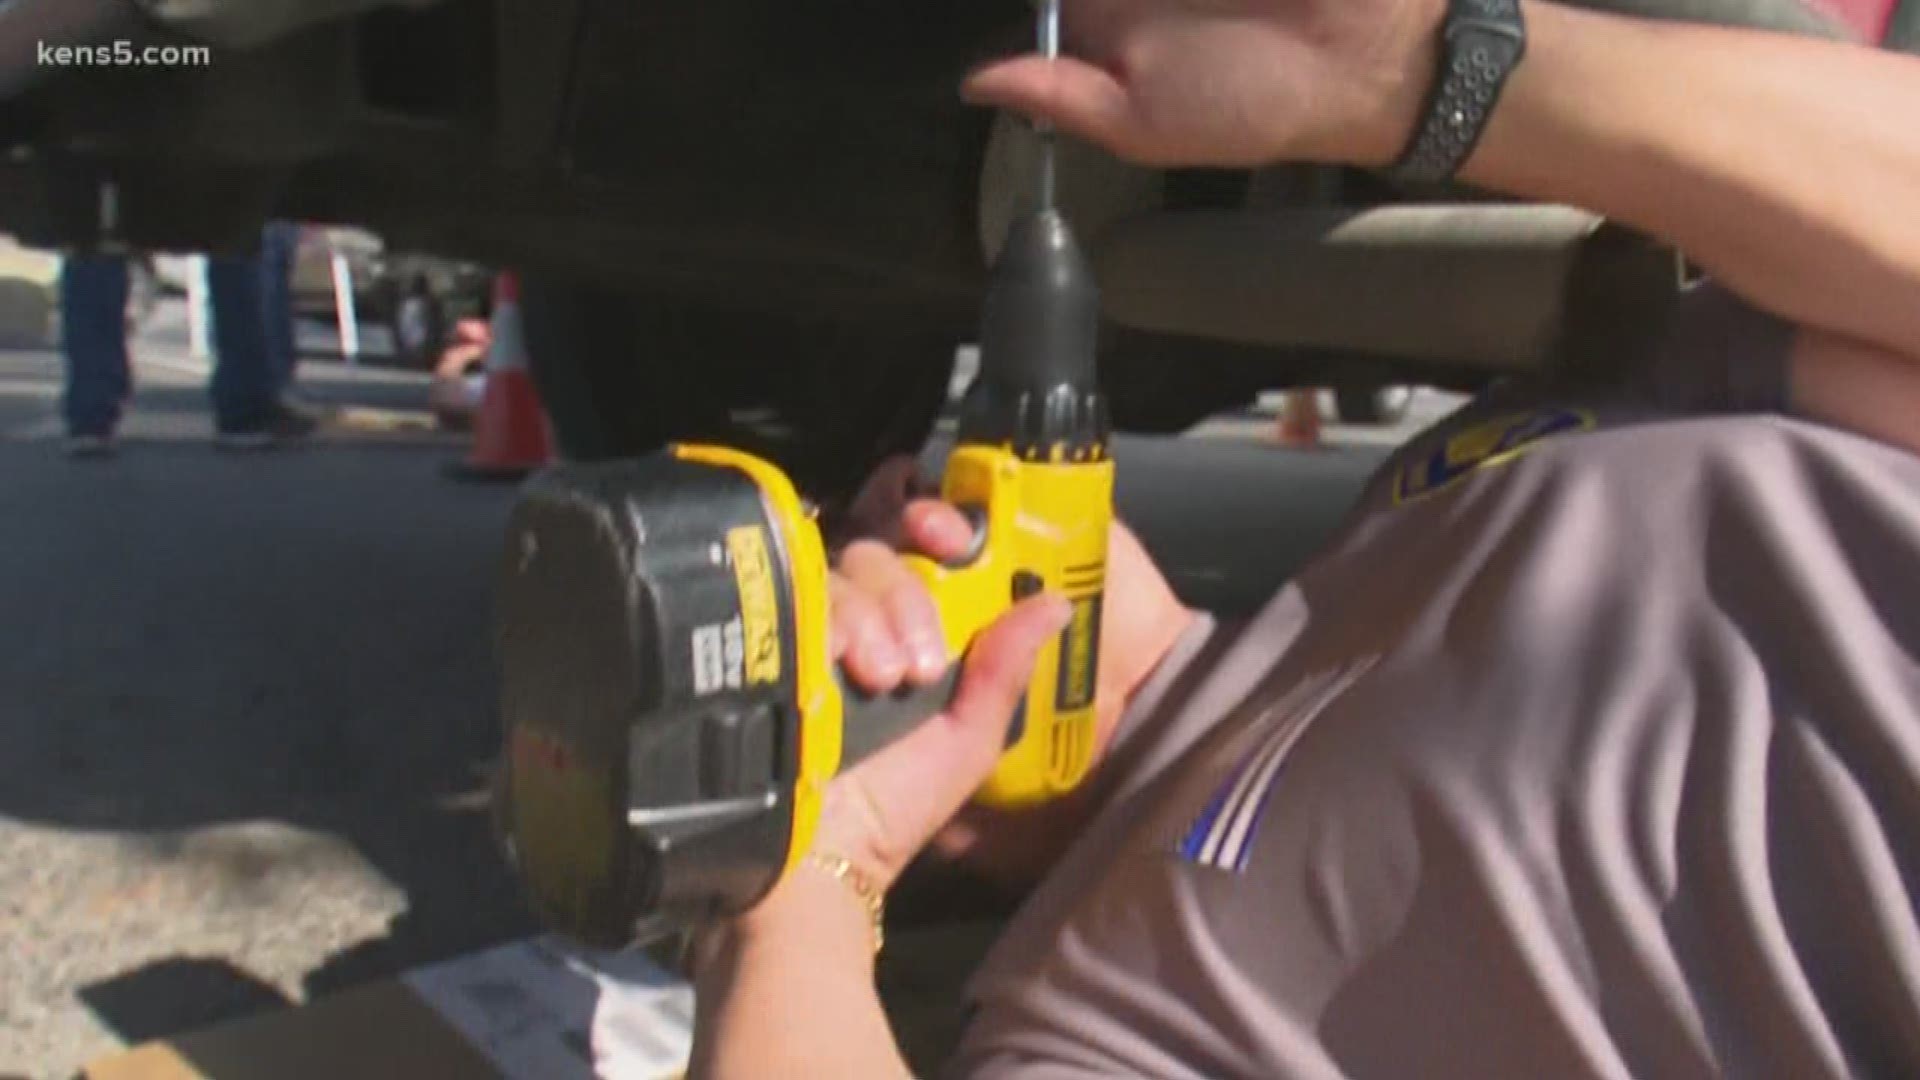 Tailgate thefts are increasing here in San Antonio, but if you own a truck, the way to stop thieves is inexpensive and easy.